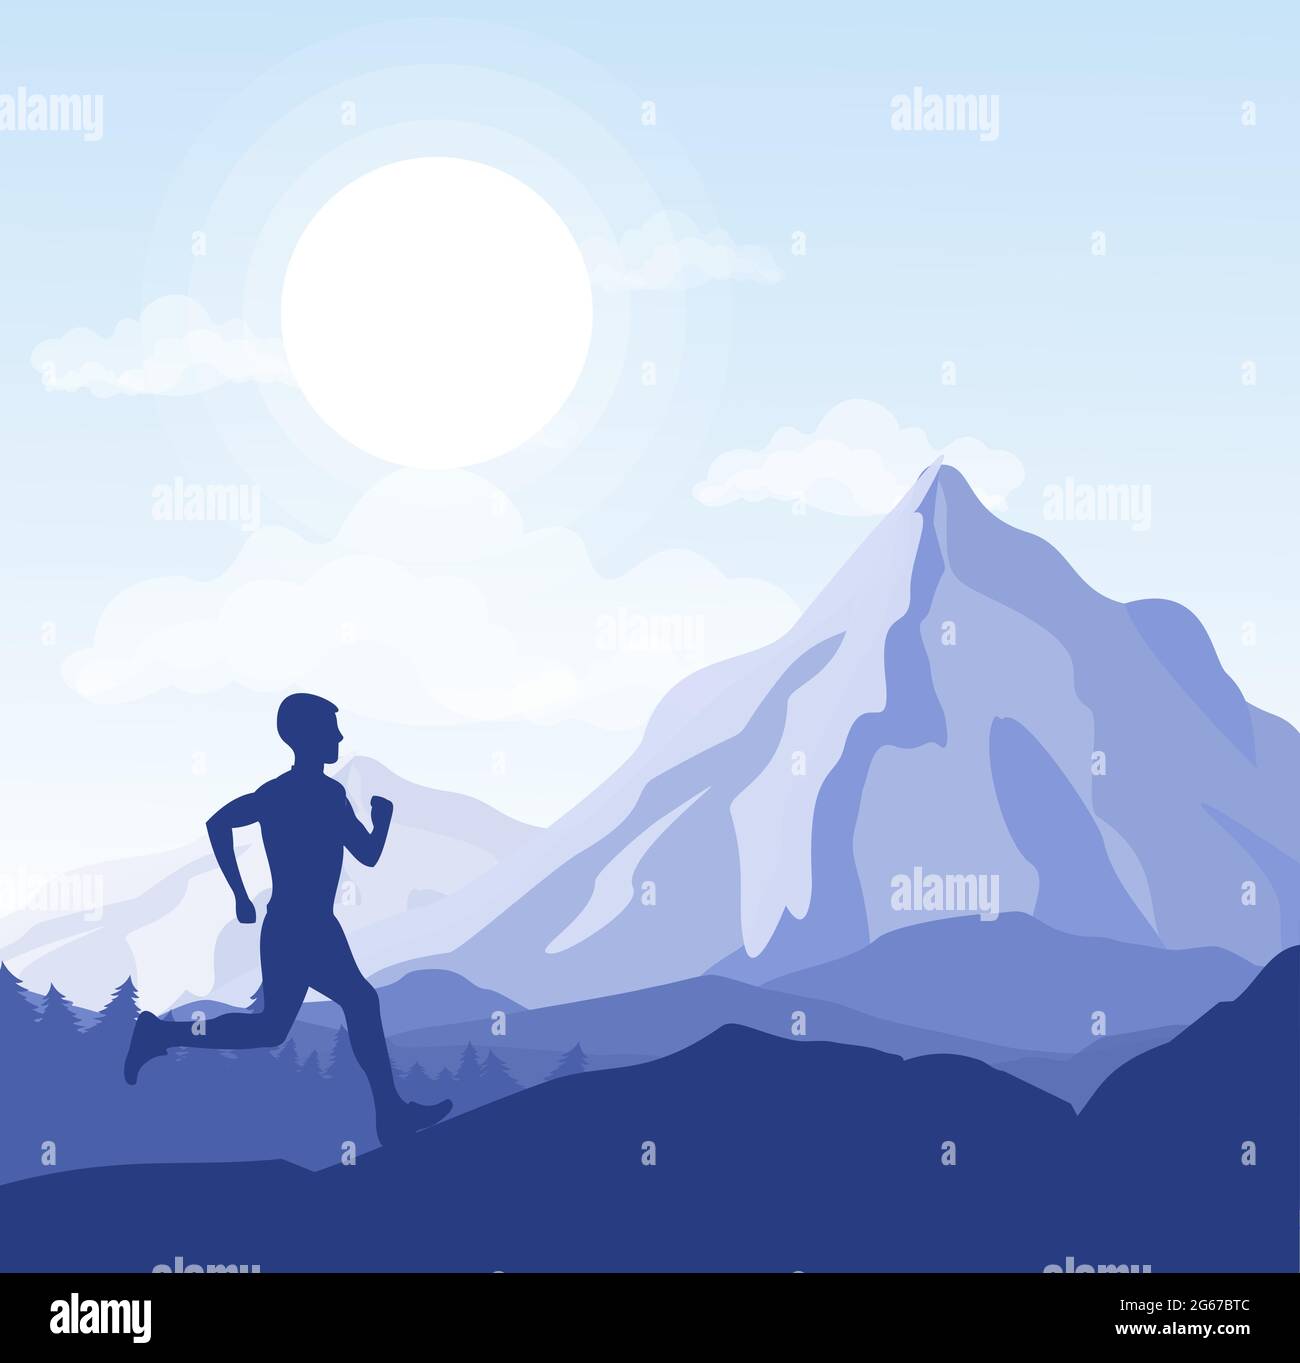 Vector illustration of running man in wild nature mountains landscape in silhouette. Stock Vector